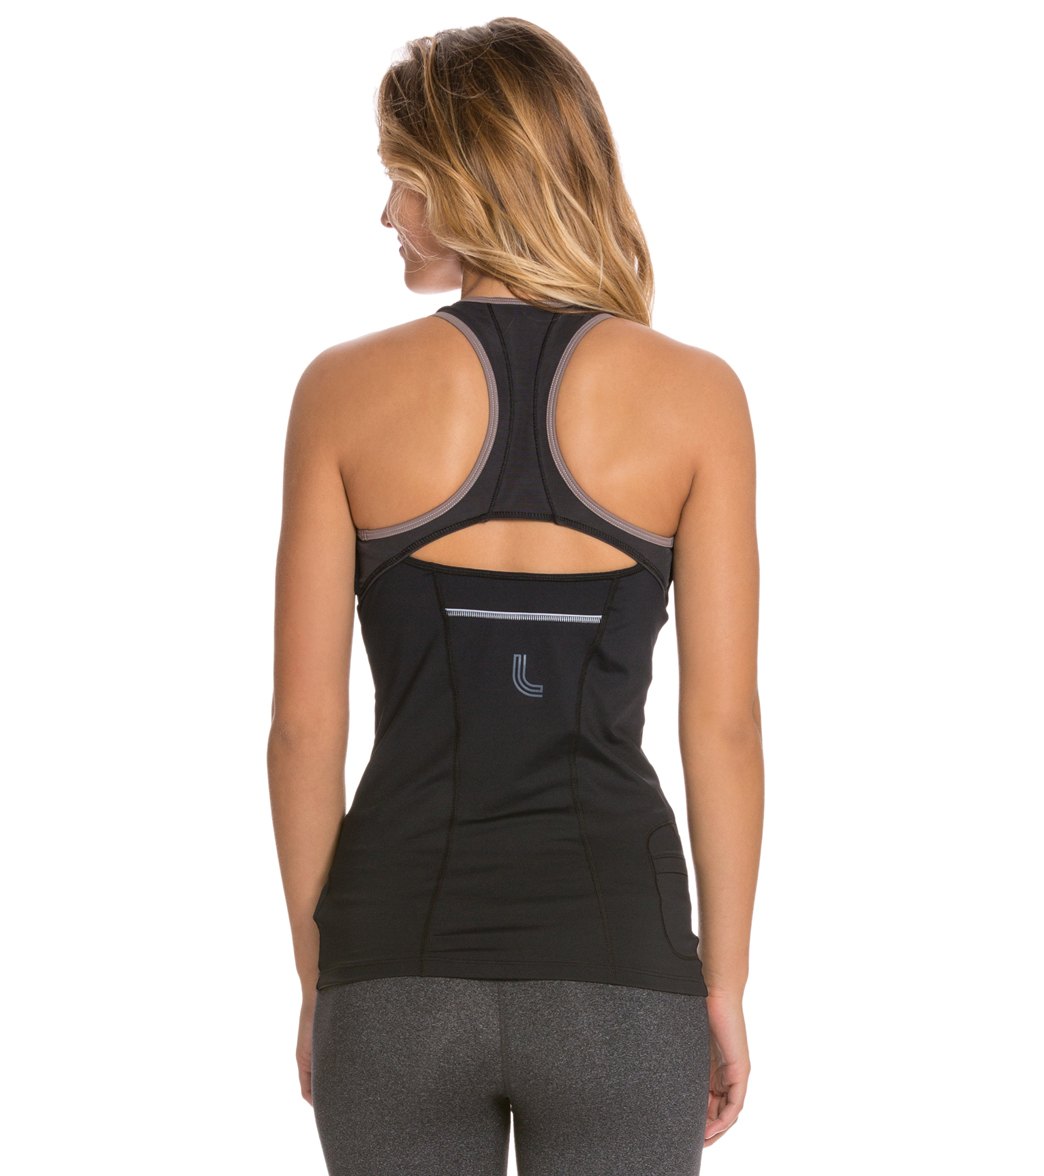 Lole Women's Central Running Top at SwimOutlet.com - Free Shipping